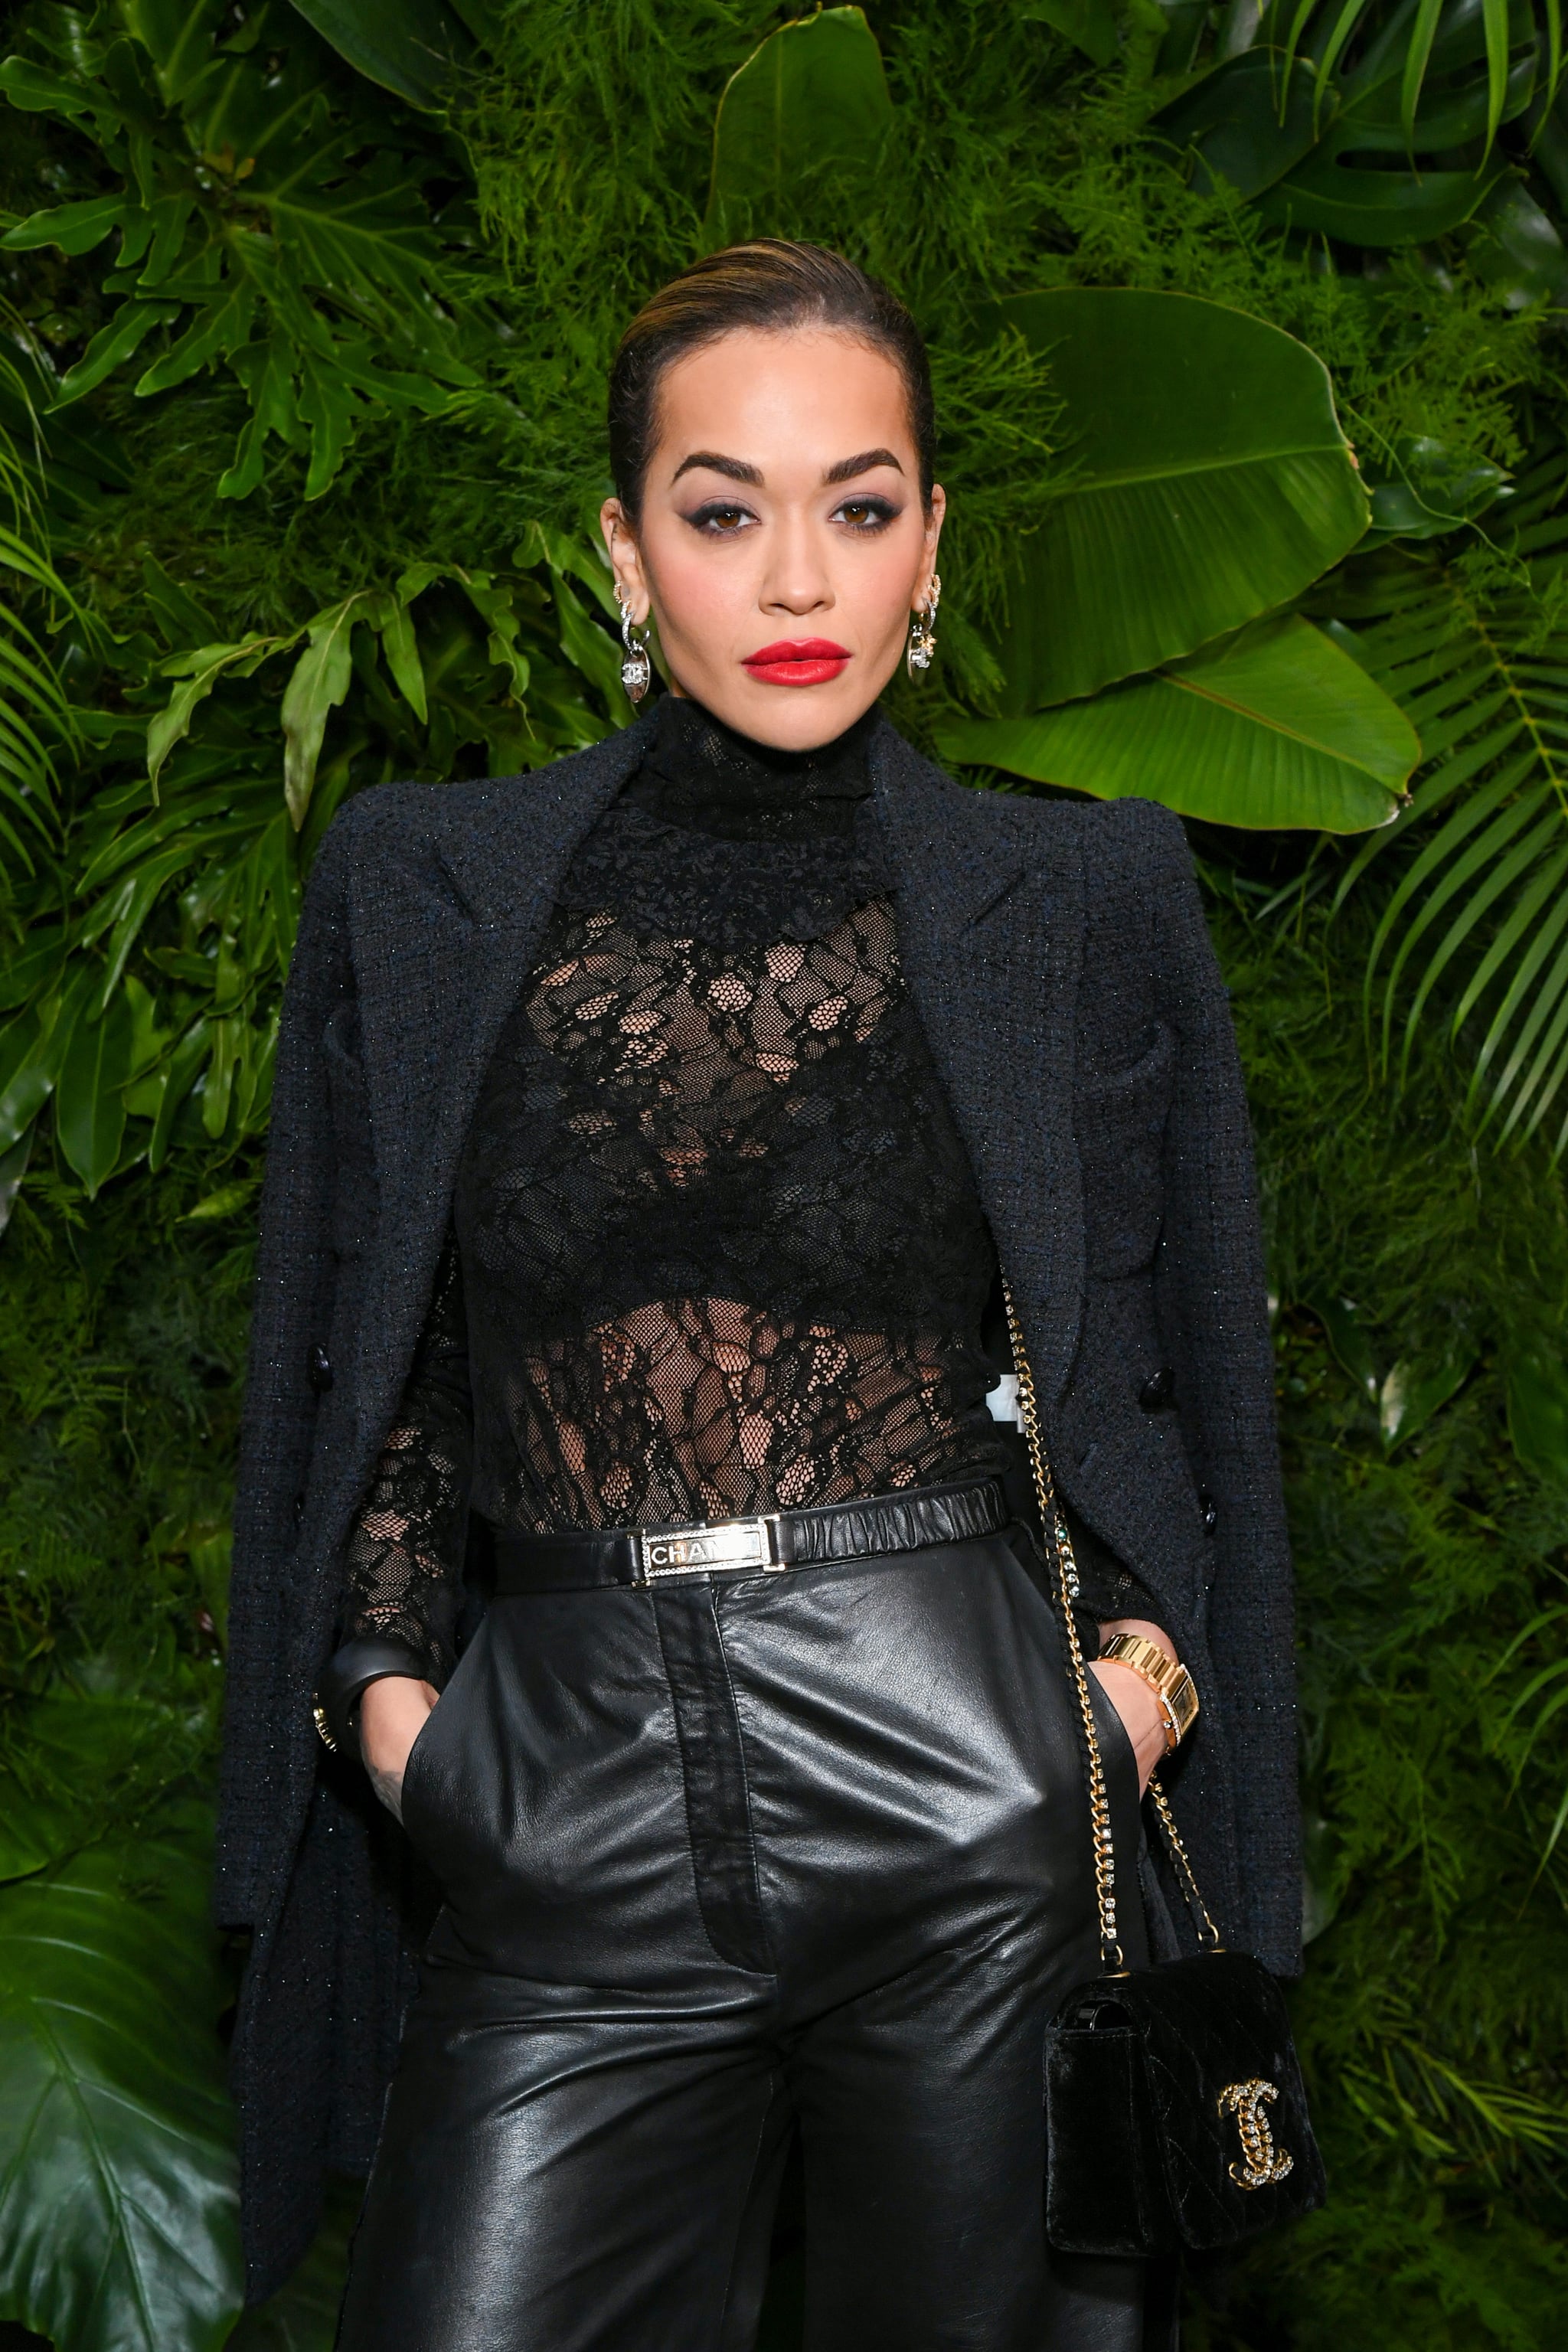 BEVERLY HILLS, CALIFORNIA - MARCH 11: Rita Ora, wearing CHANEL attends the CHANEL and Charles Finch Pre-Oscar Awards Dinner on March 11, 2023 in Beverly Hills, California. (Photo by Jon Kopaloff/WireImage)